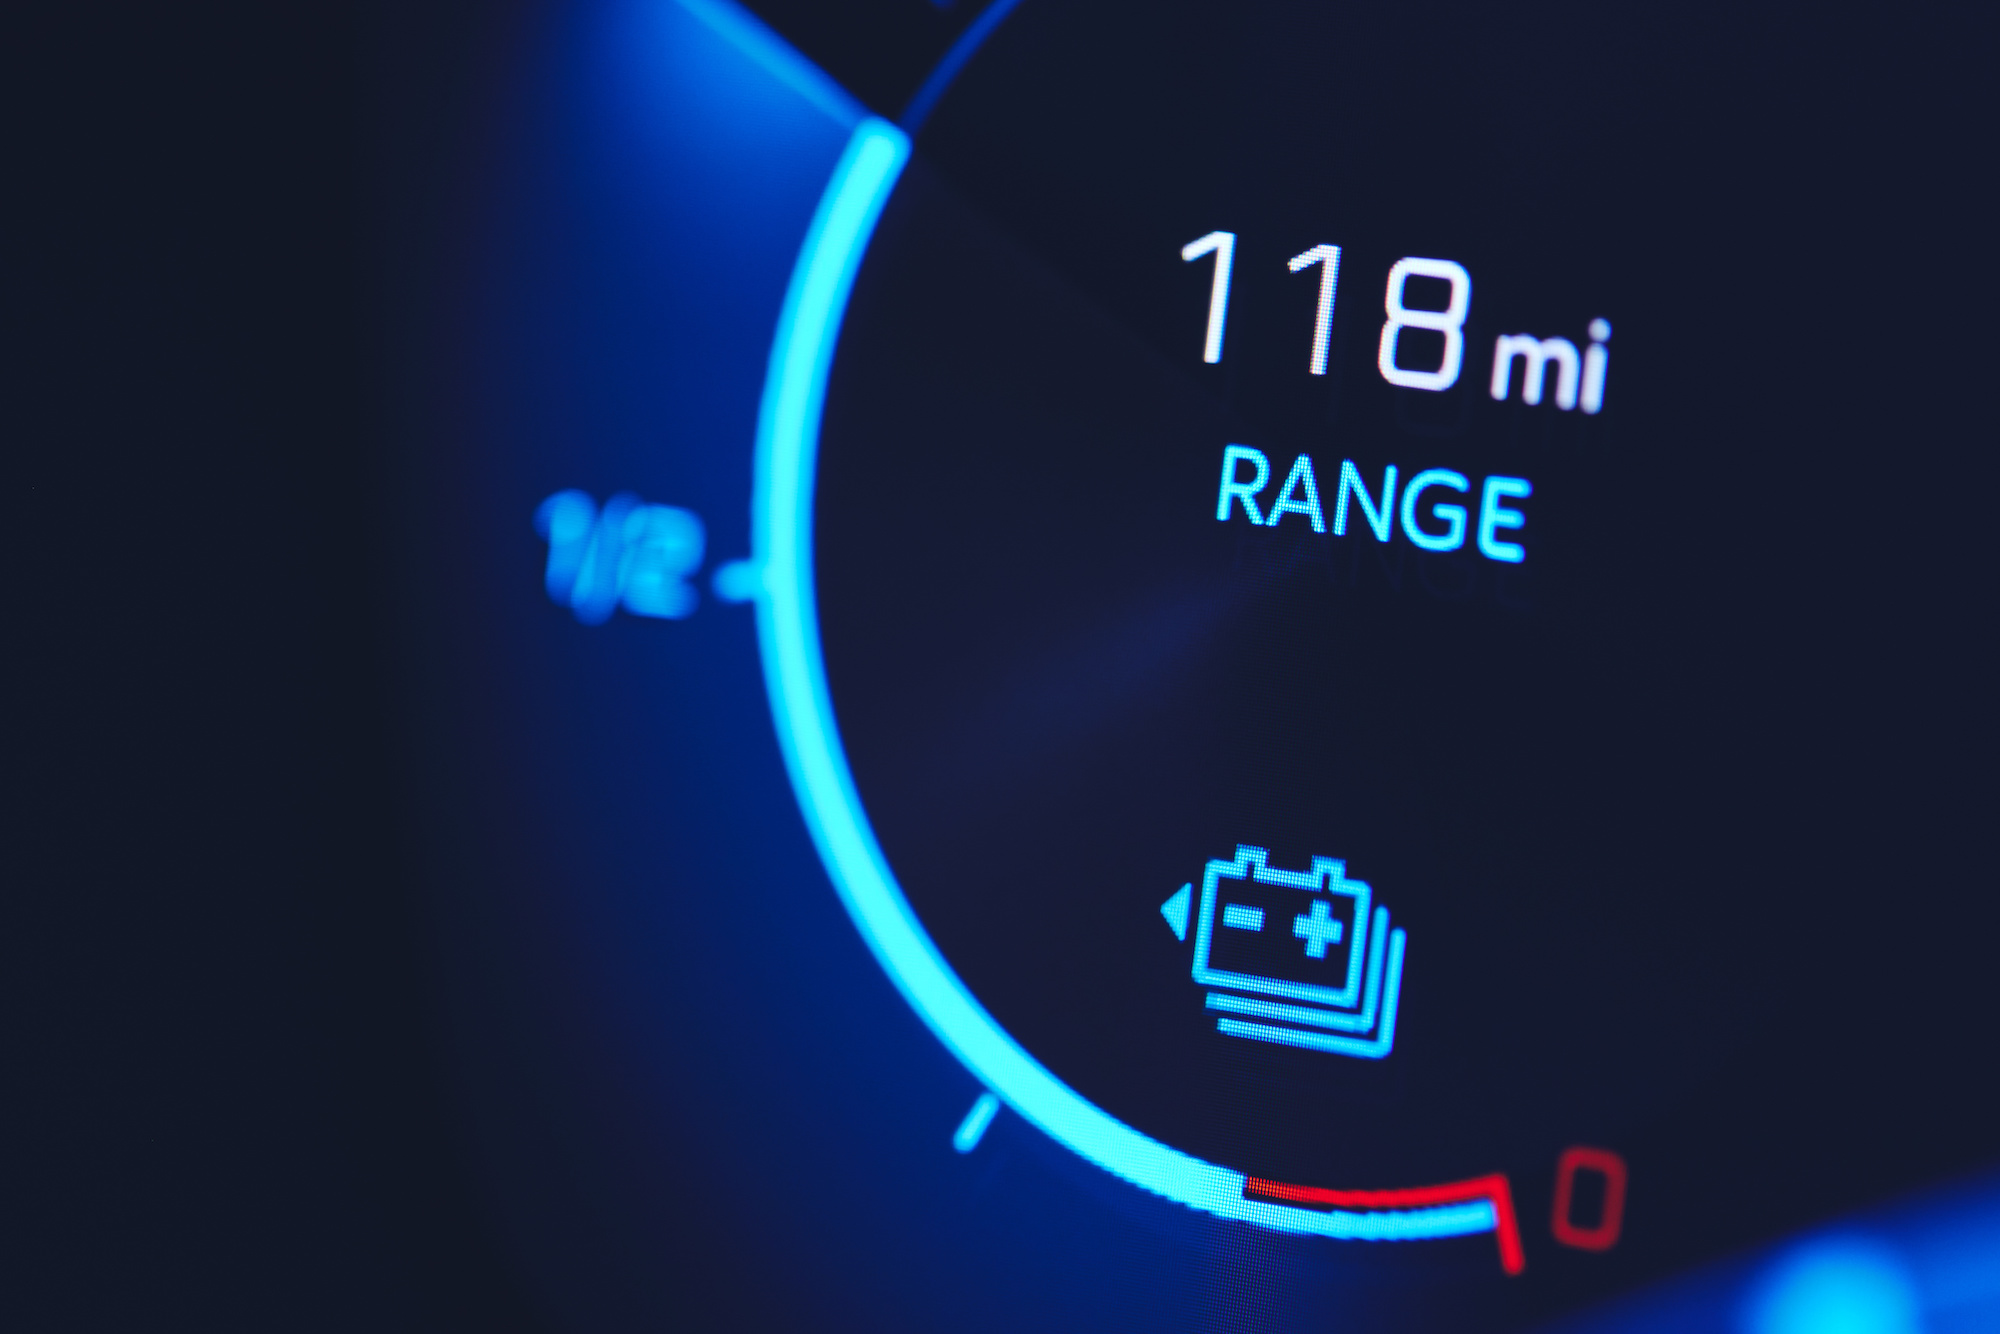 A close up picture of the range gauge in an electric car, showing that there are 118 miles left.